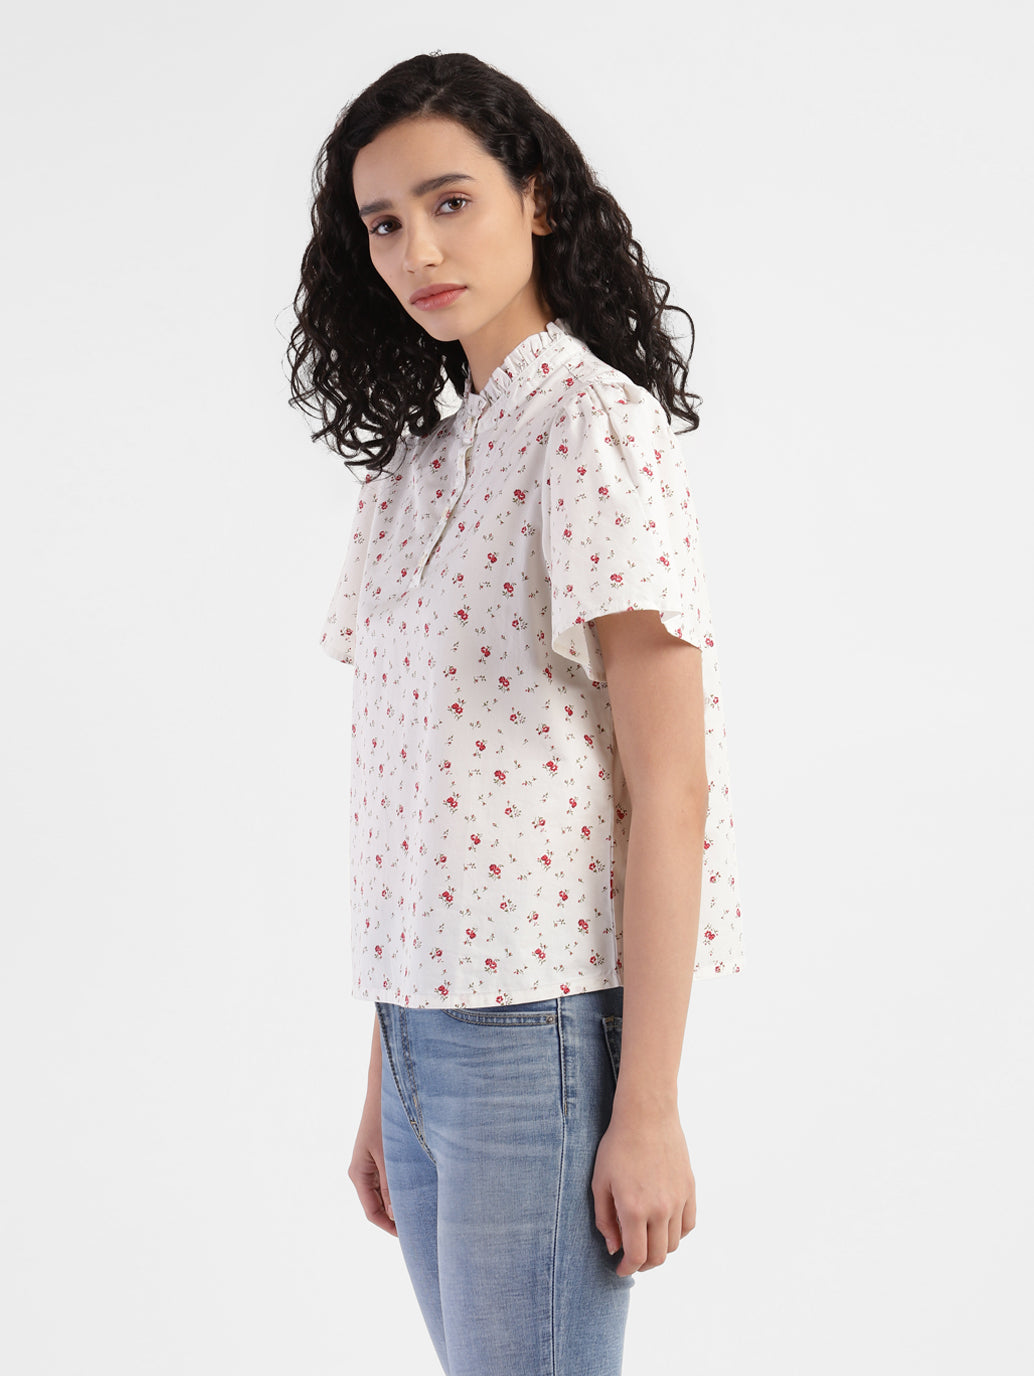 Women's Floral Print Band Neck Top